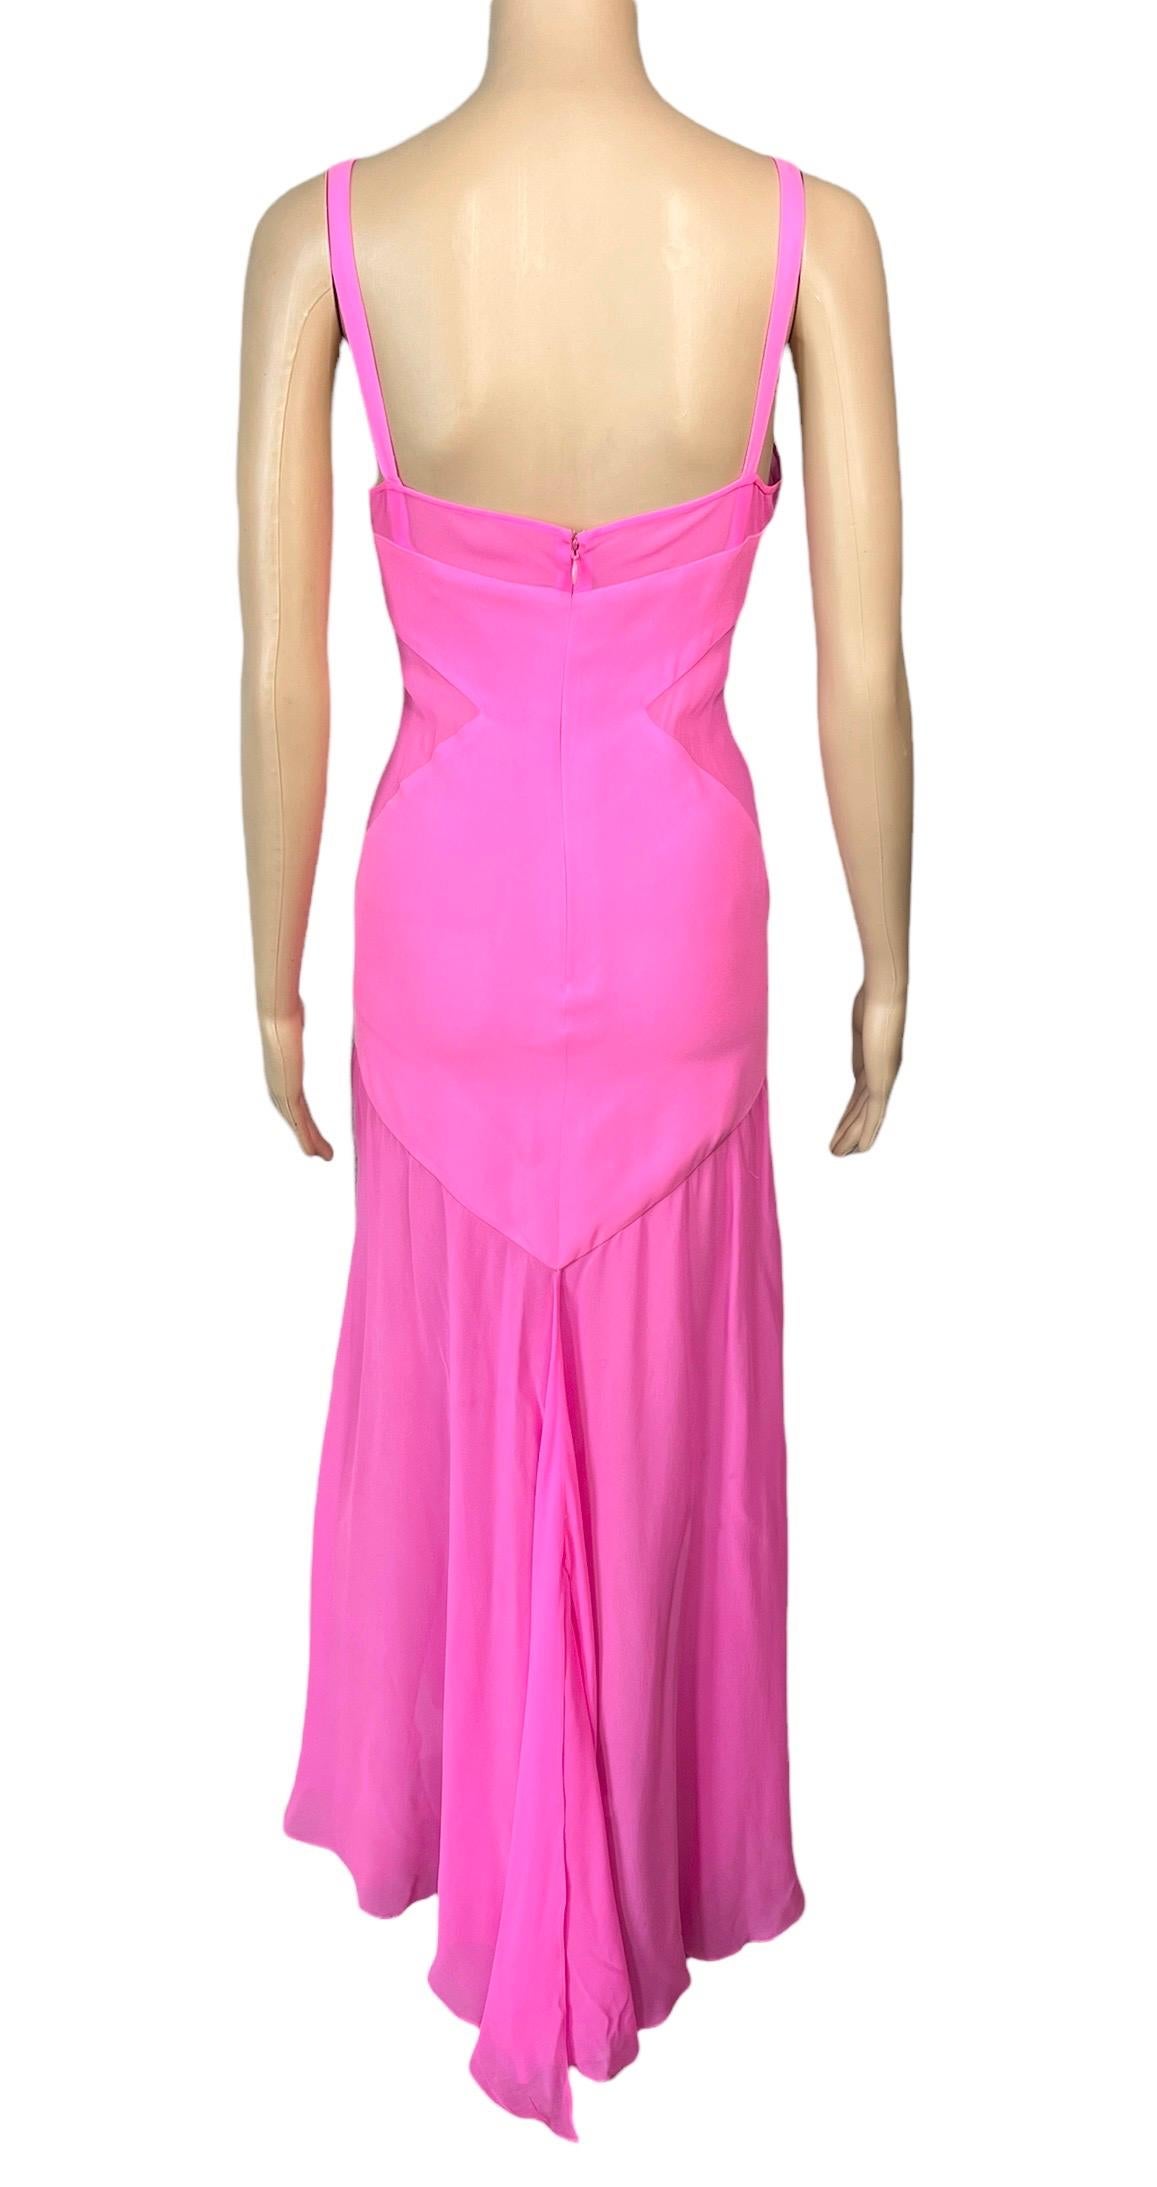 Gianni Versace S/S 1995 Vintage Sheer Panels Silk Pink Evening Dress Gown For Sale 1